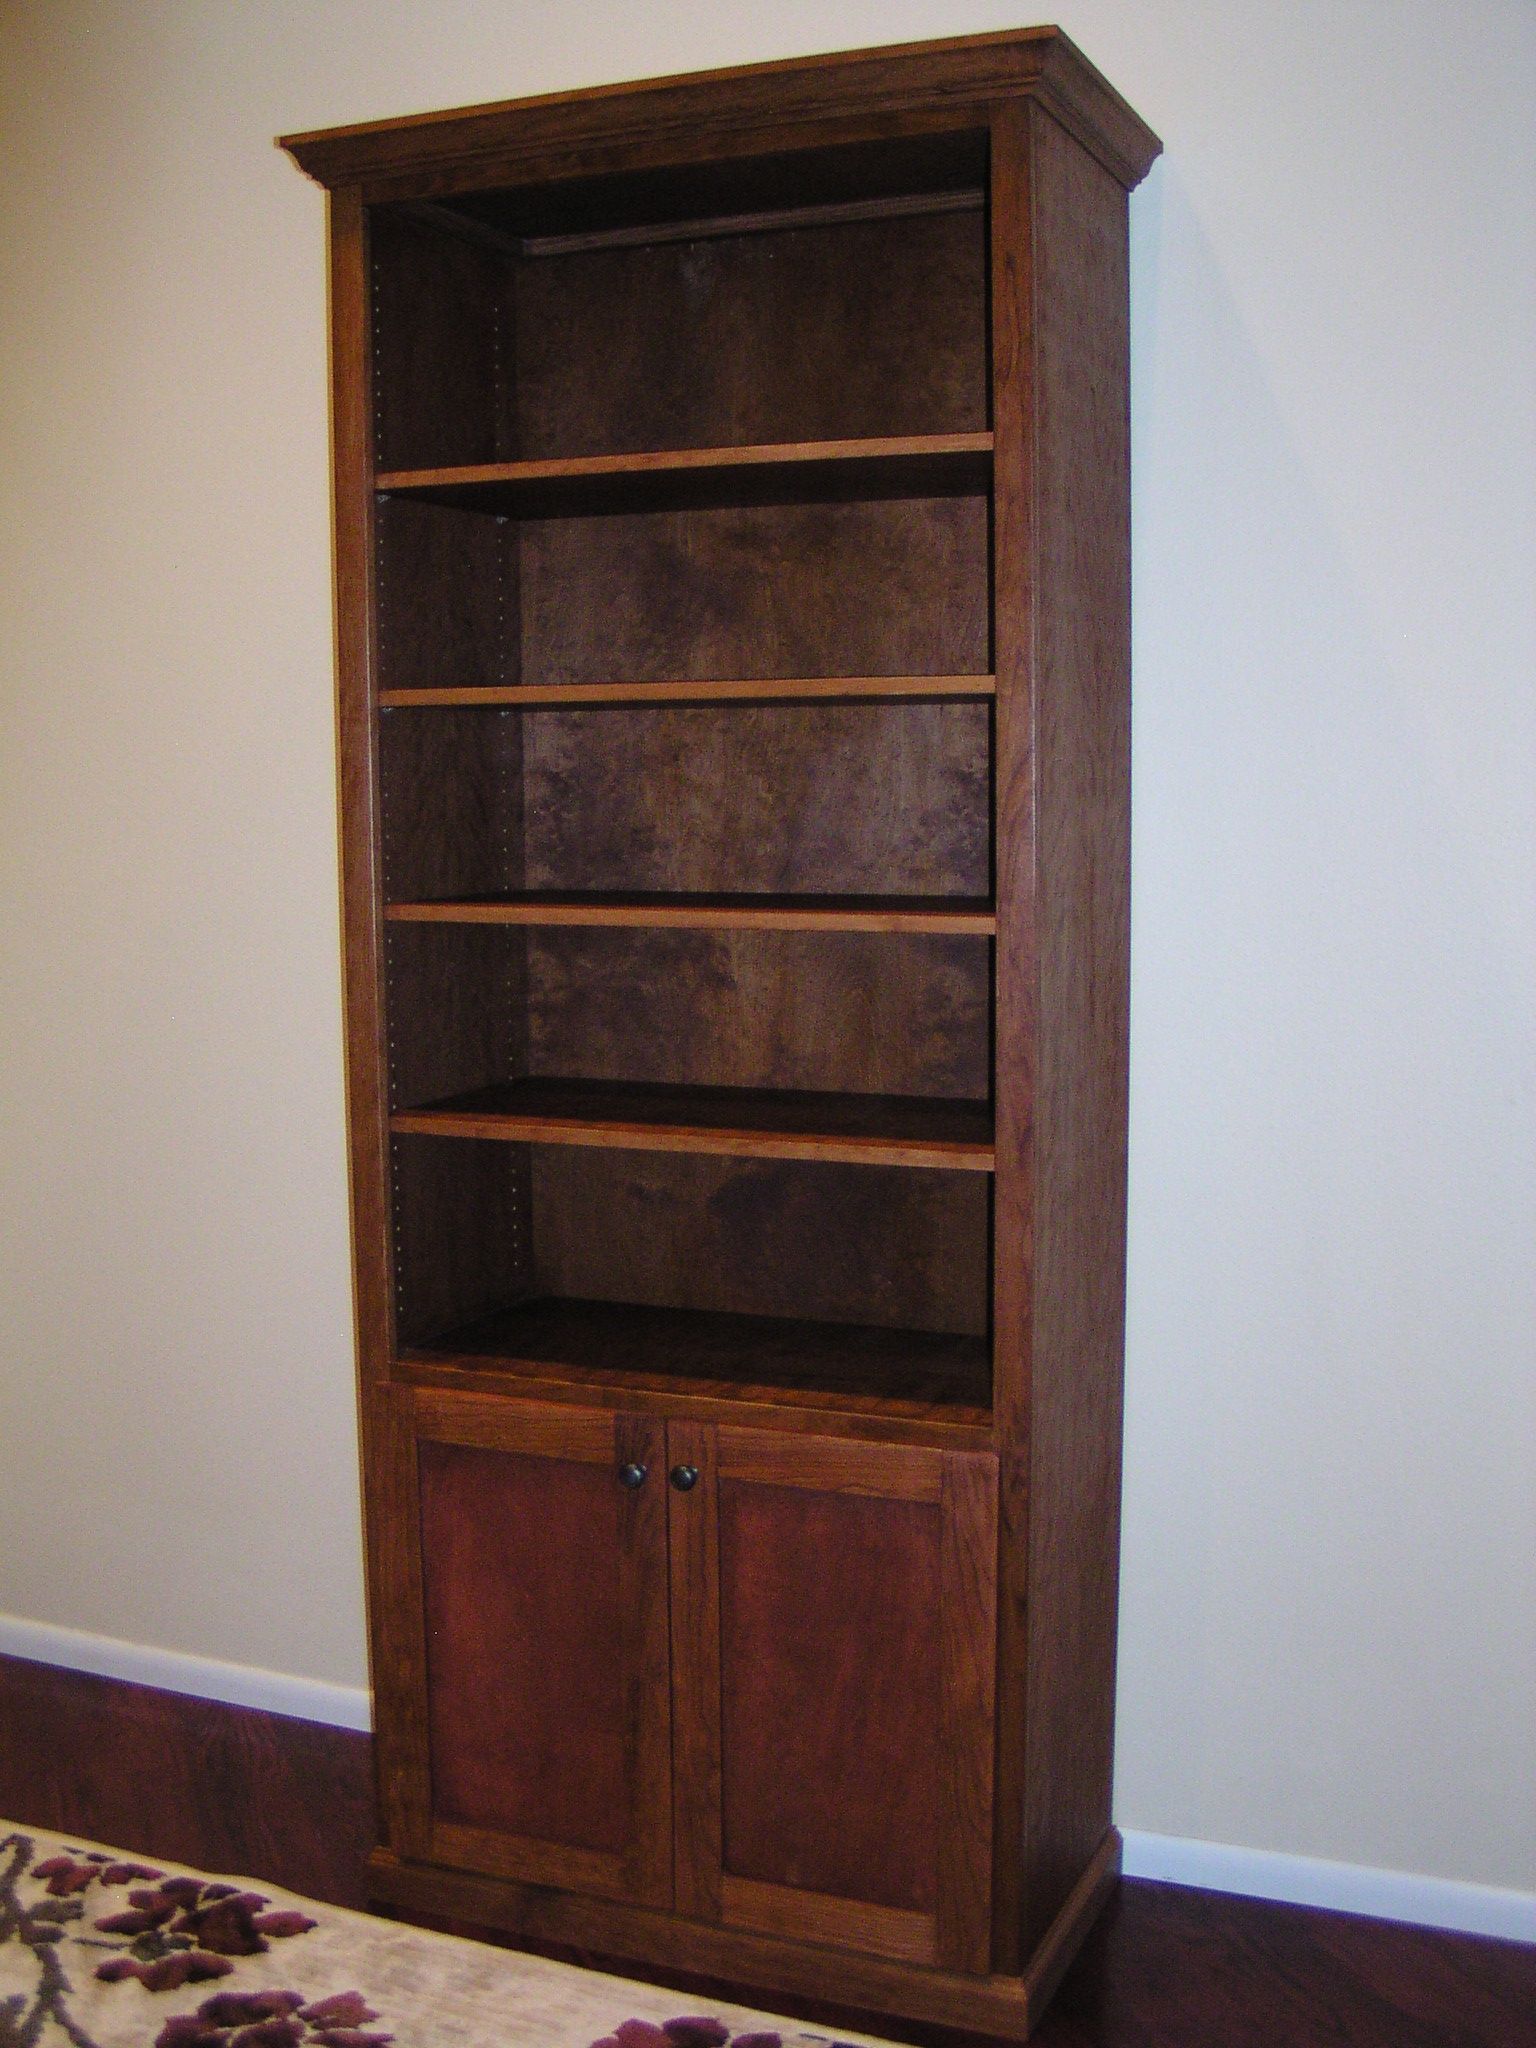 Furniture Twisted Oak Custom Woodworks Intended For Bookcase With Cabinet Base (View 9 of 15)